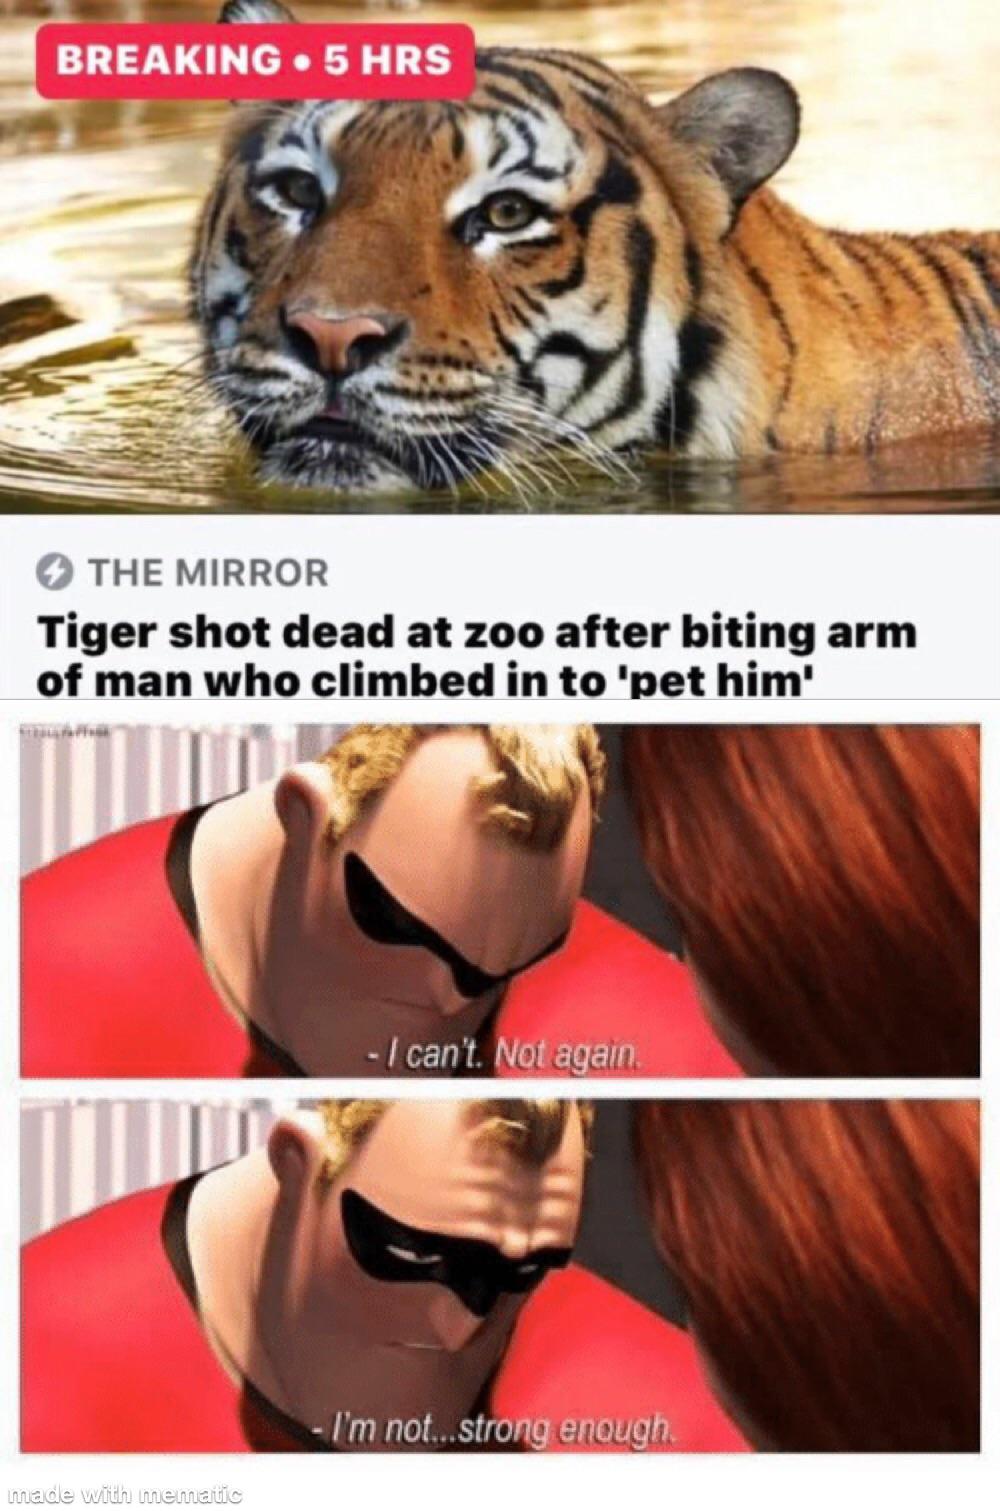 funny memes - dank memes - nnn challenge - Breaking 5 Hrs The Mirror Tiger shot dead at zoo after biting arm of man who climbed in to 'pet him' I can't. Not again I'm not...strong enough made with mematic